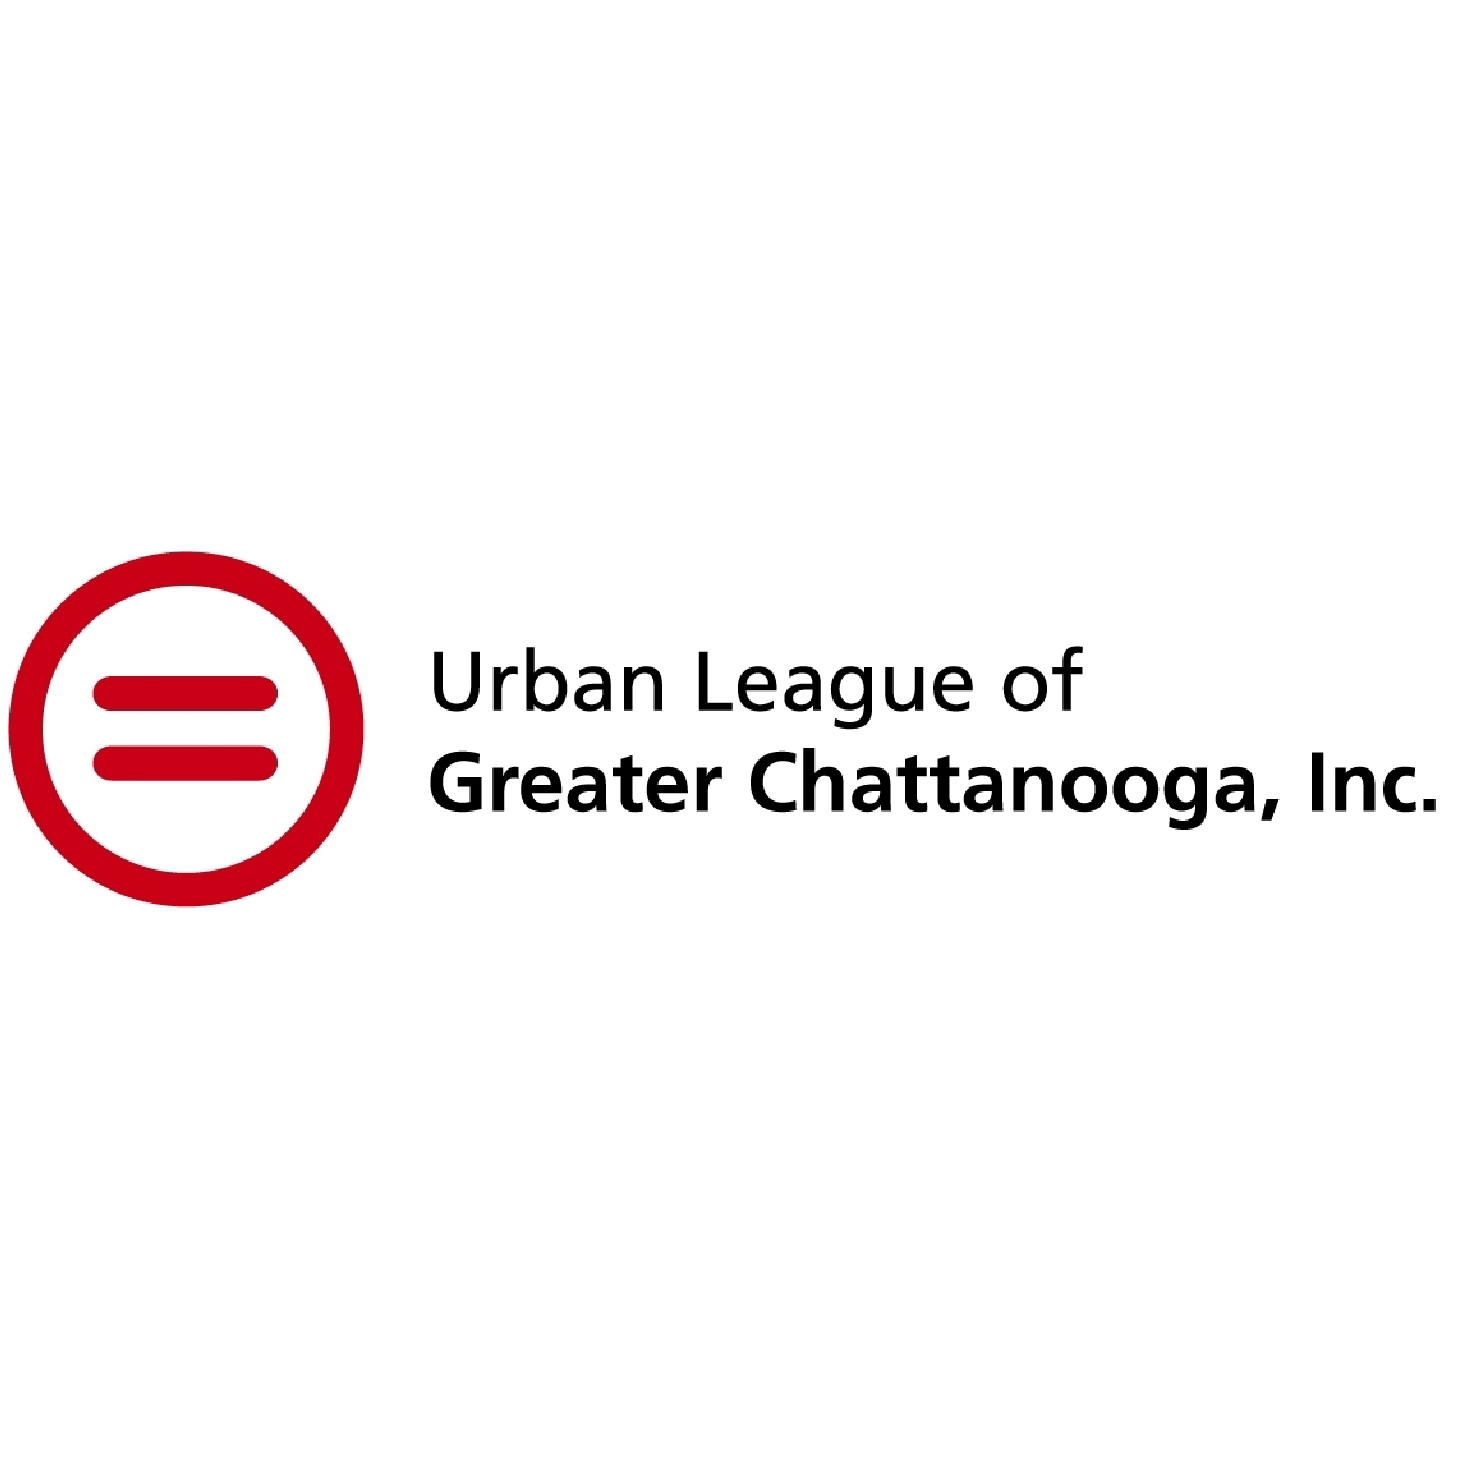 Business Briefs Urban League of Greater Chattanooga resumes tax aid